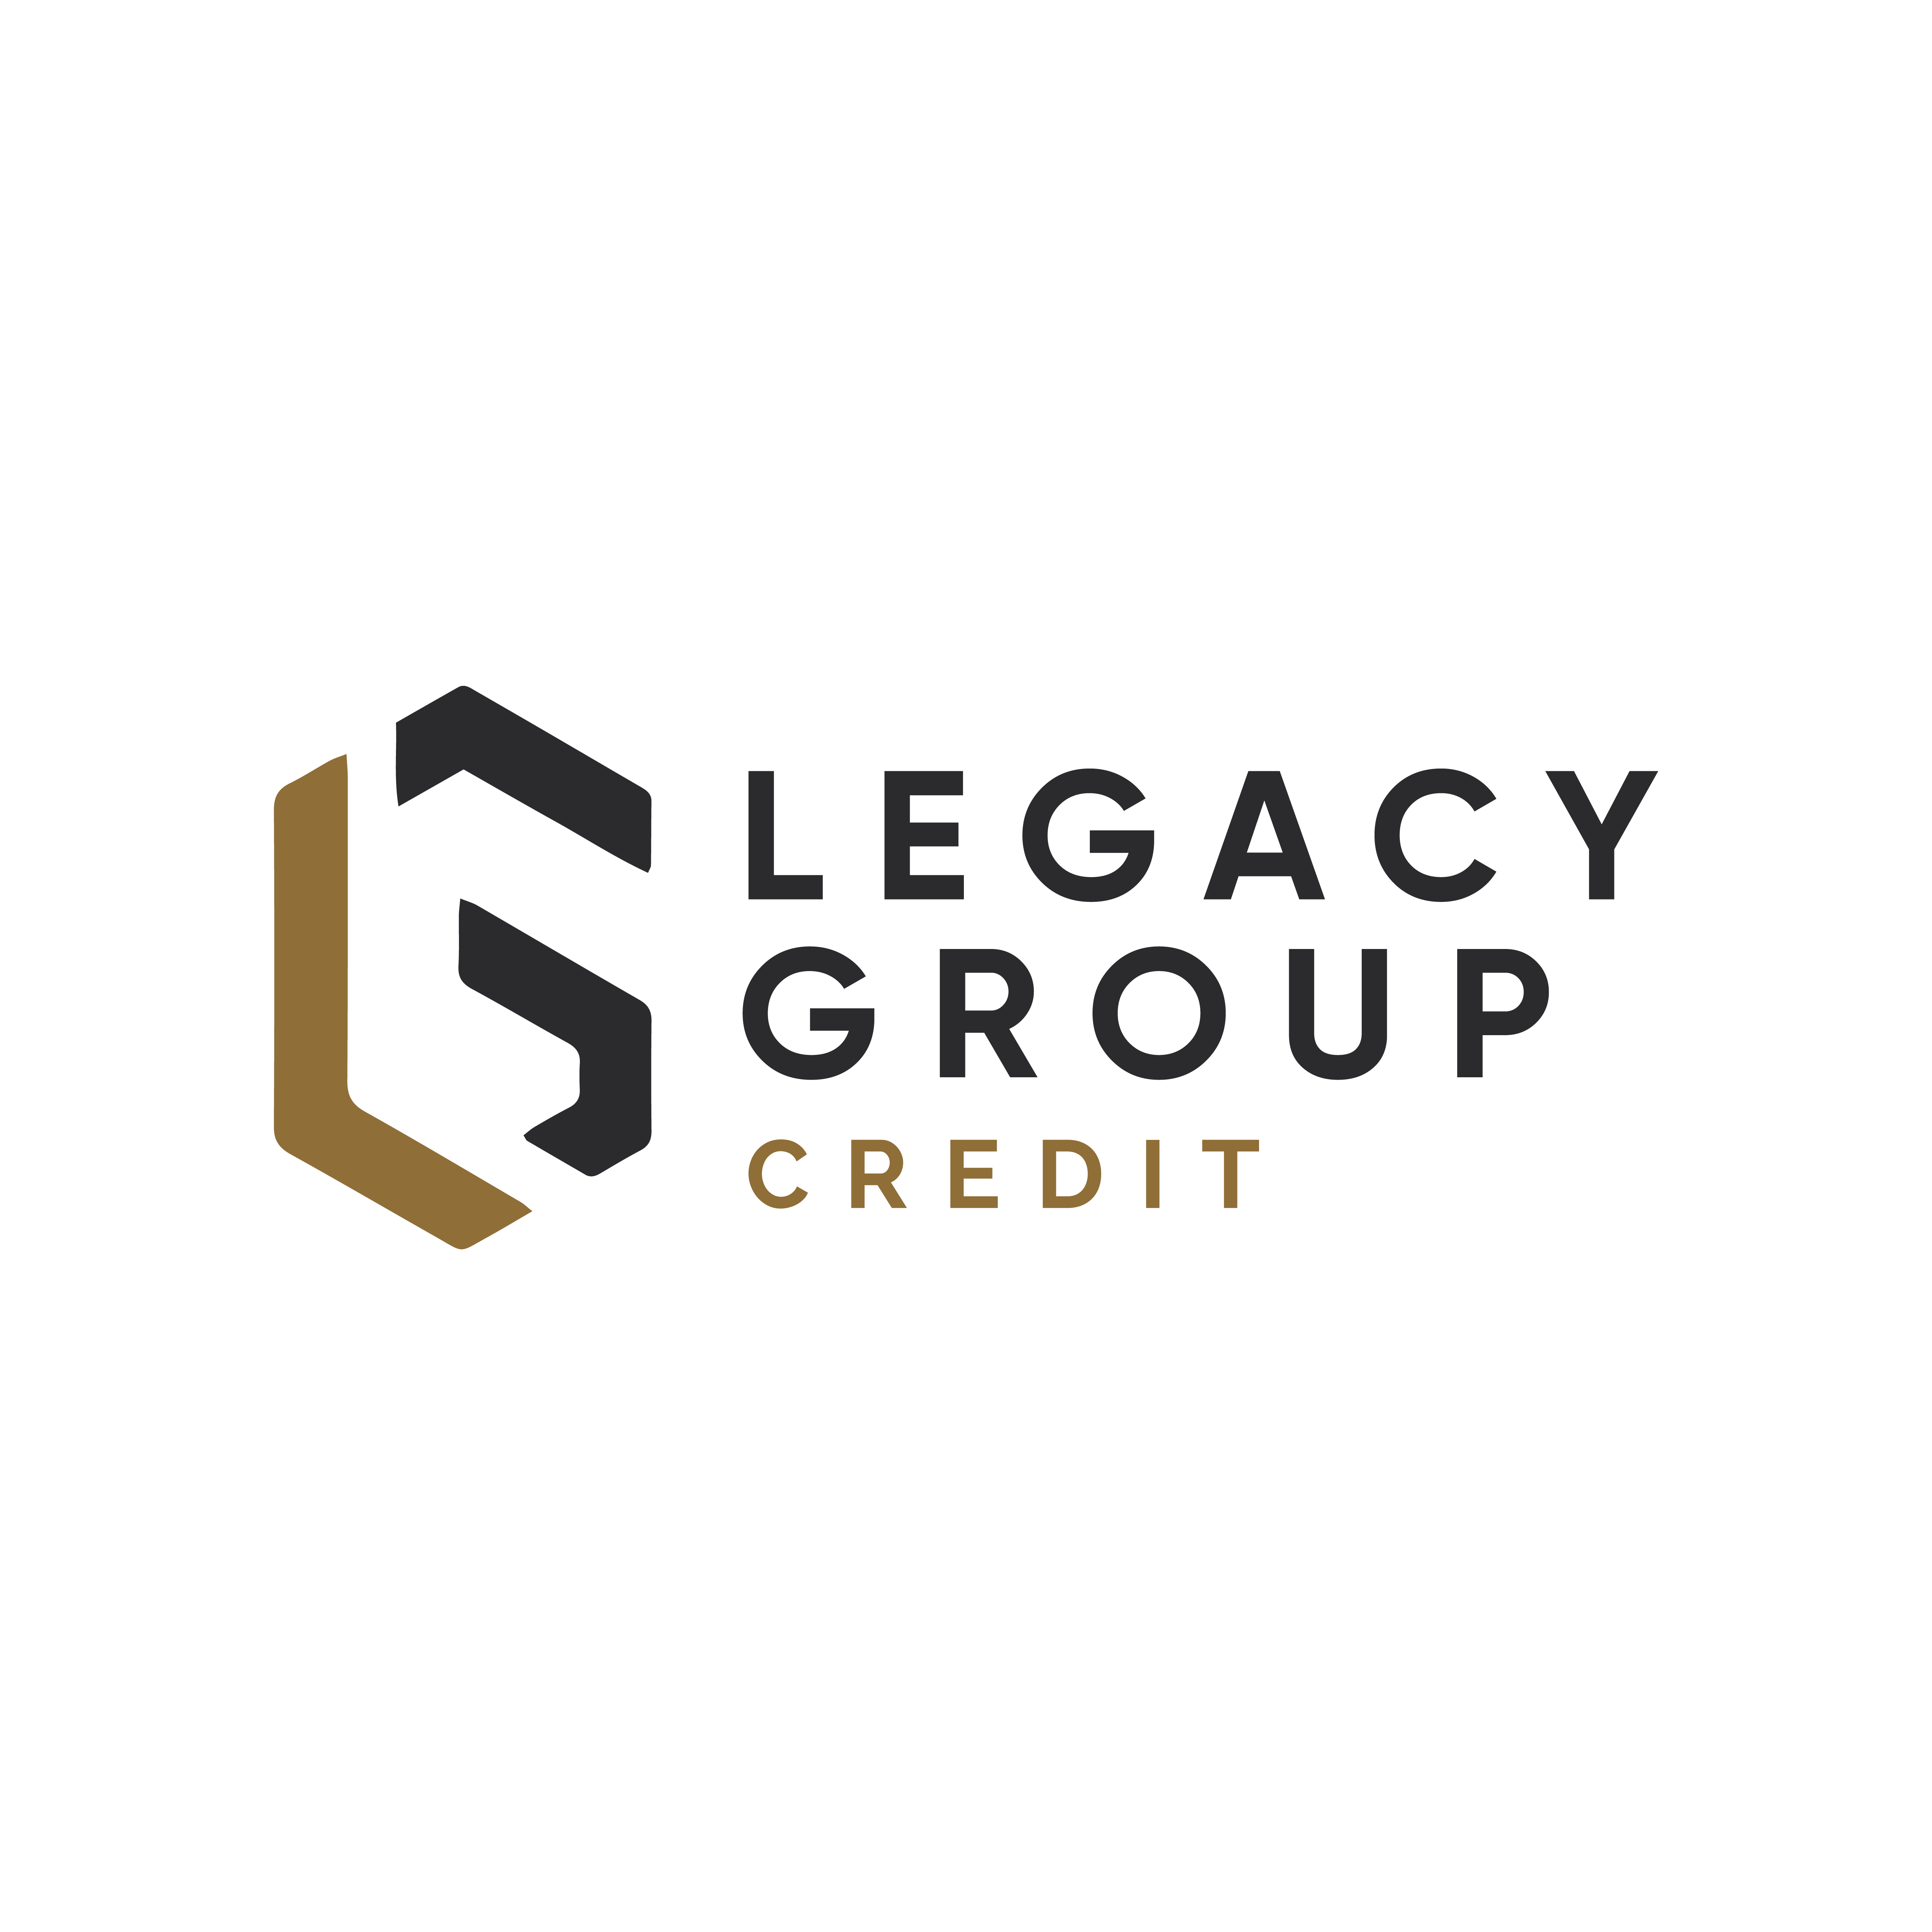 Legacy Credit Group